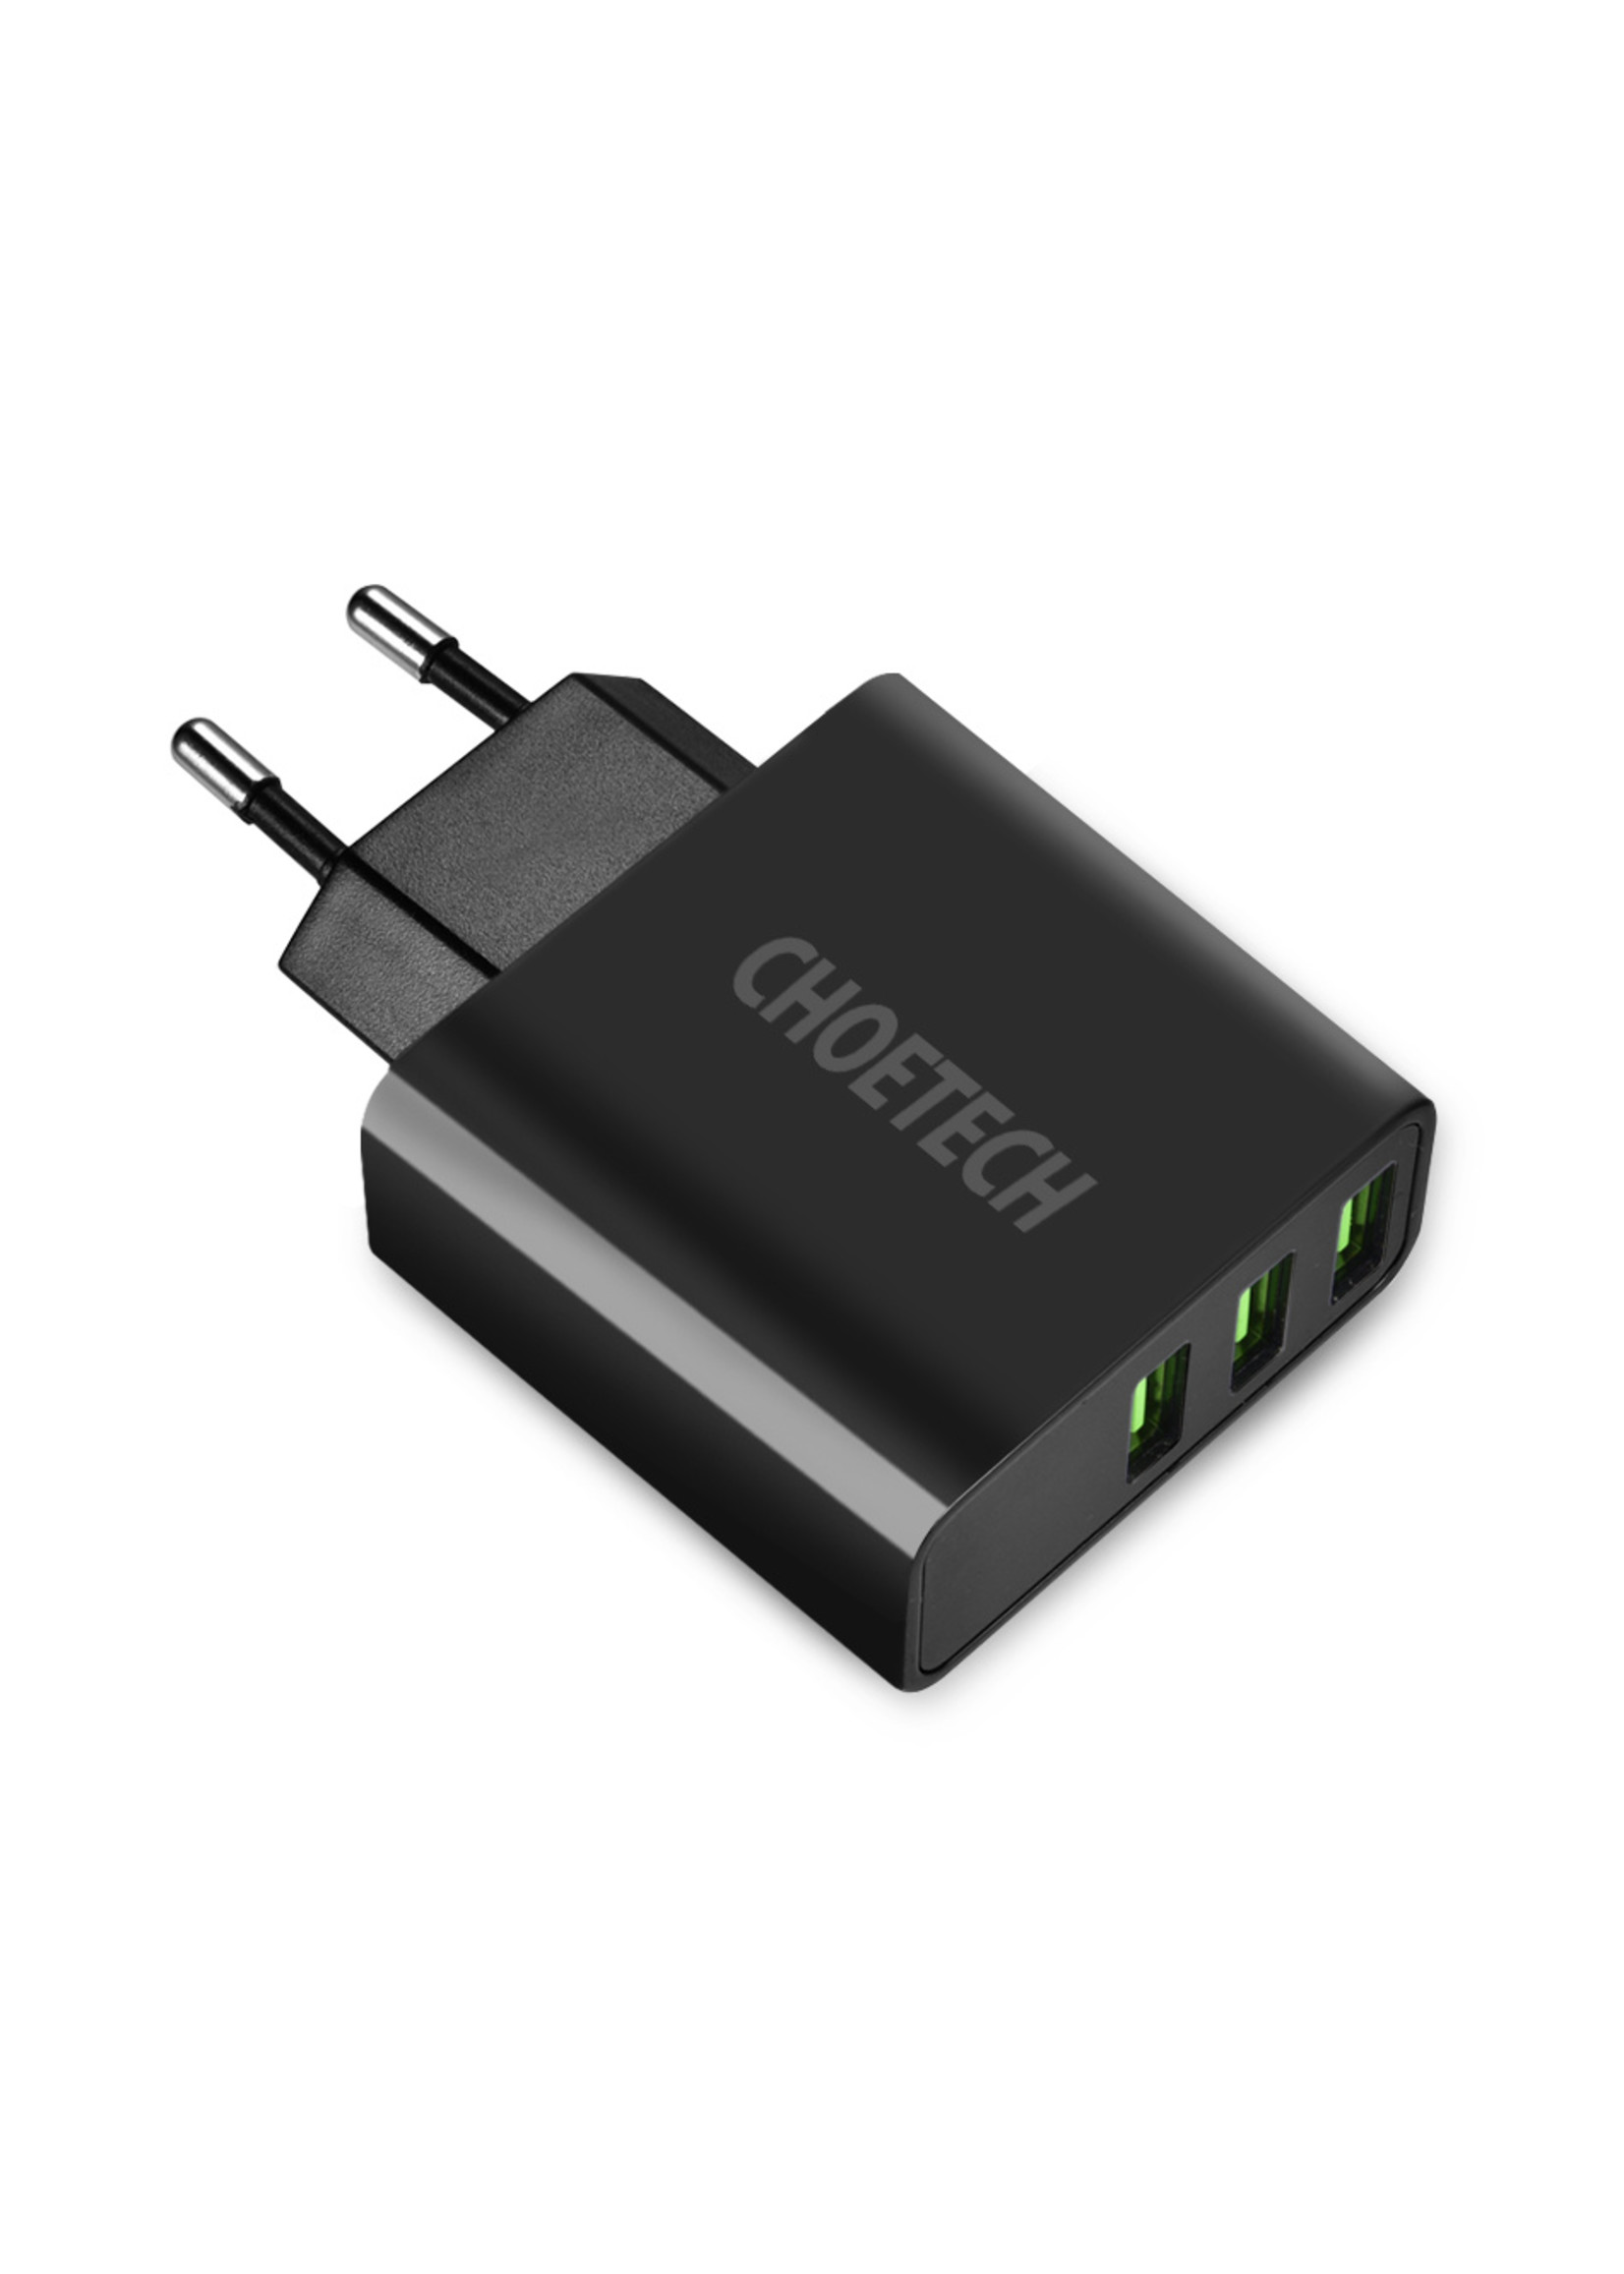 Choetech - Universal adapter with 3 USB Type-A charging ports - With LED display - 3A- Black